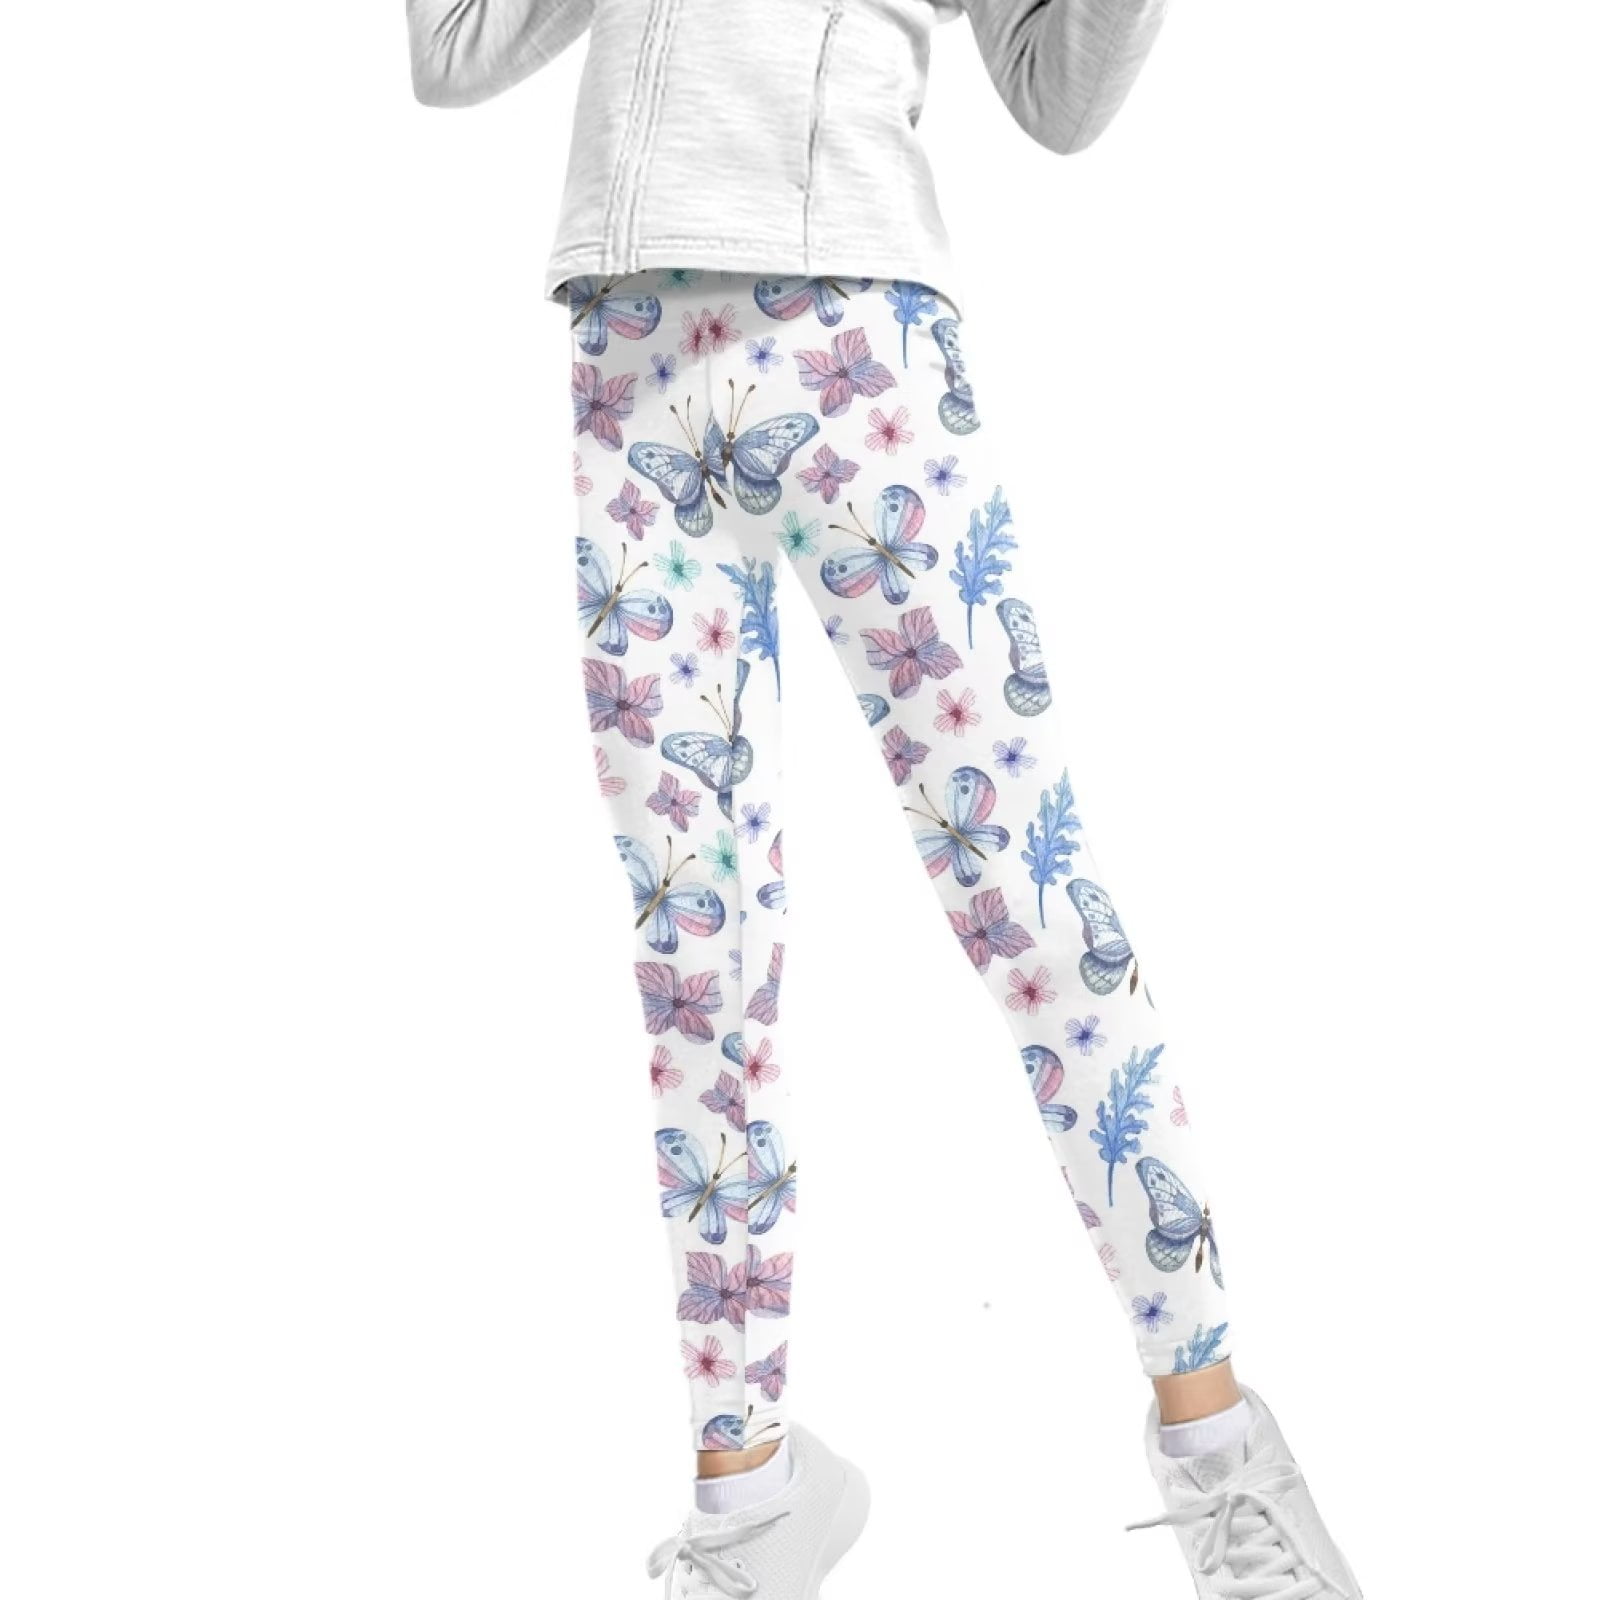 FKELYI Floral Butterfly Kids Leggings Size 6-7 Years Stretchy Playing Yoga  Pants for Girls High Waisted Comfy Travel Tights Aesthetic